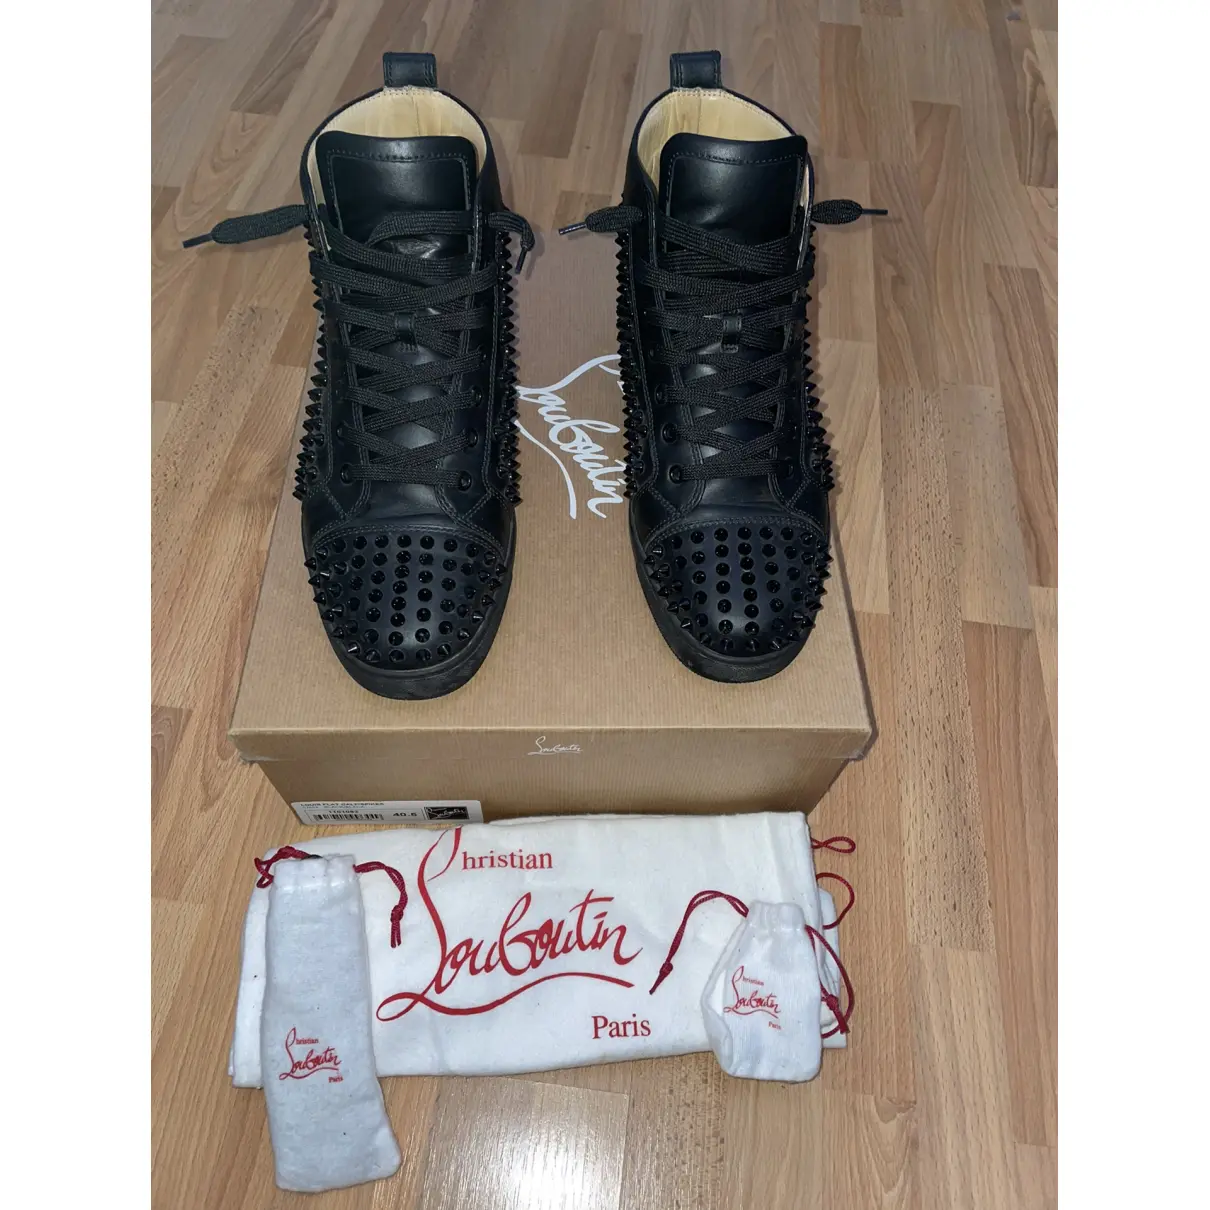 Buy Christian Louboutin Louis leather high trainers online